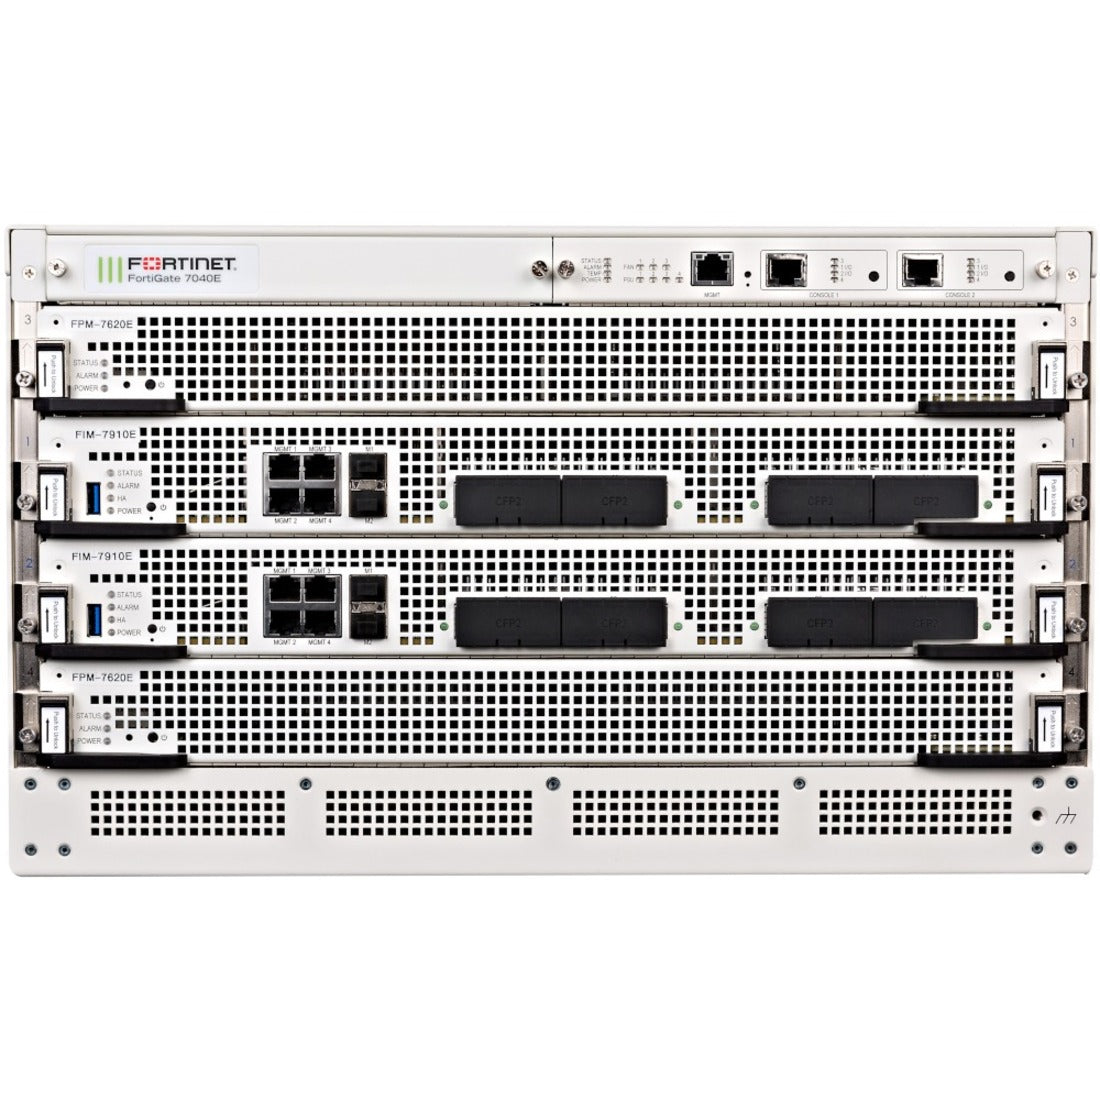 Fortinet FG-7040E-9 FortiGate Network Security/Firewall Appliance, 48000 VPN Supported, 6U Rack-mountable